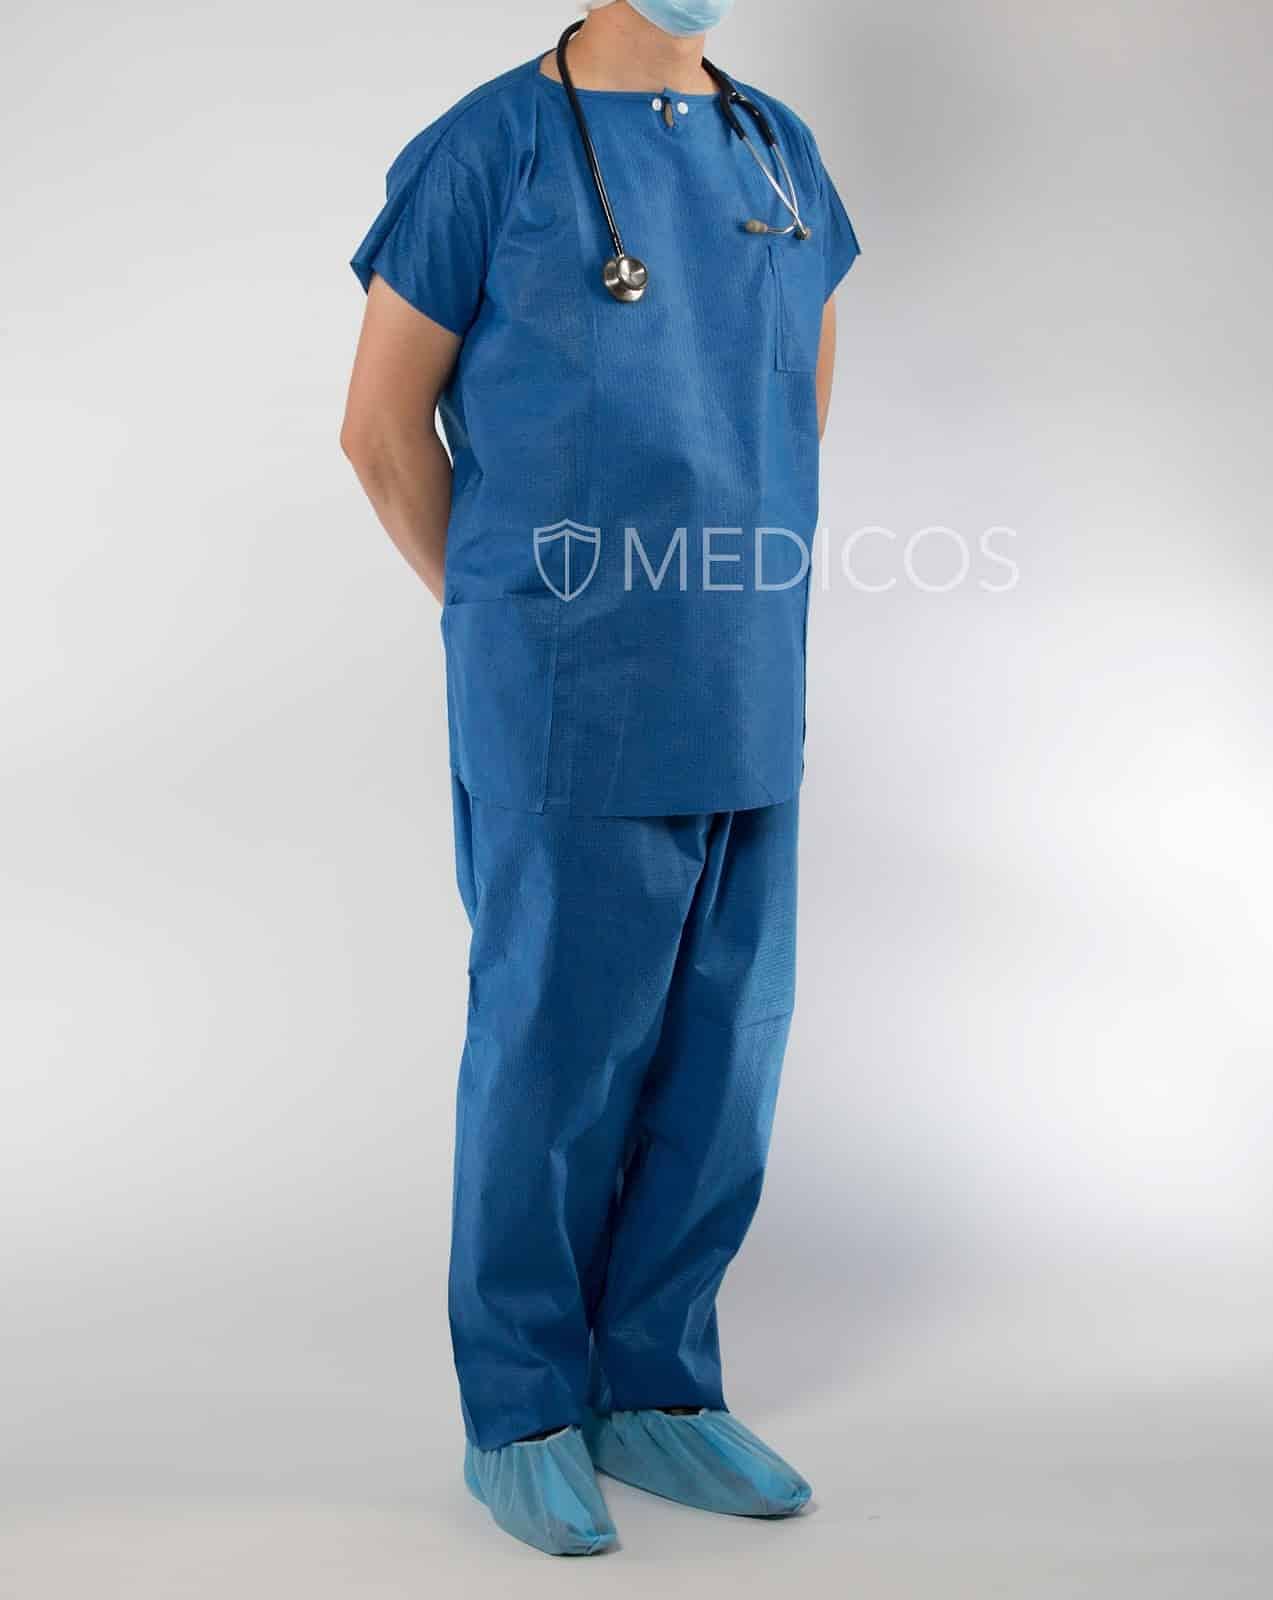 Surgical Scrubs Online, OT Dress for Doctors With Name - Navy Blue